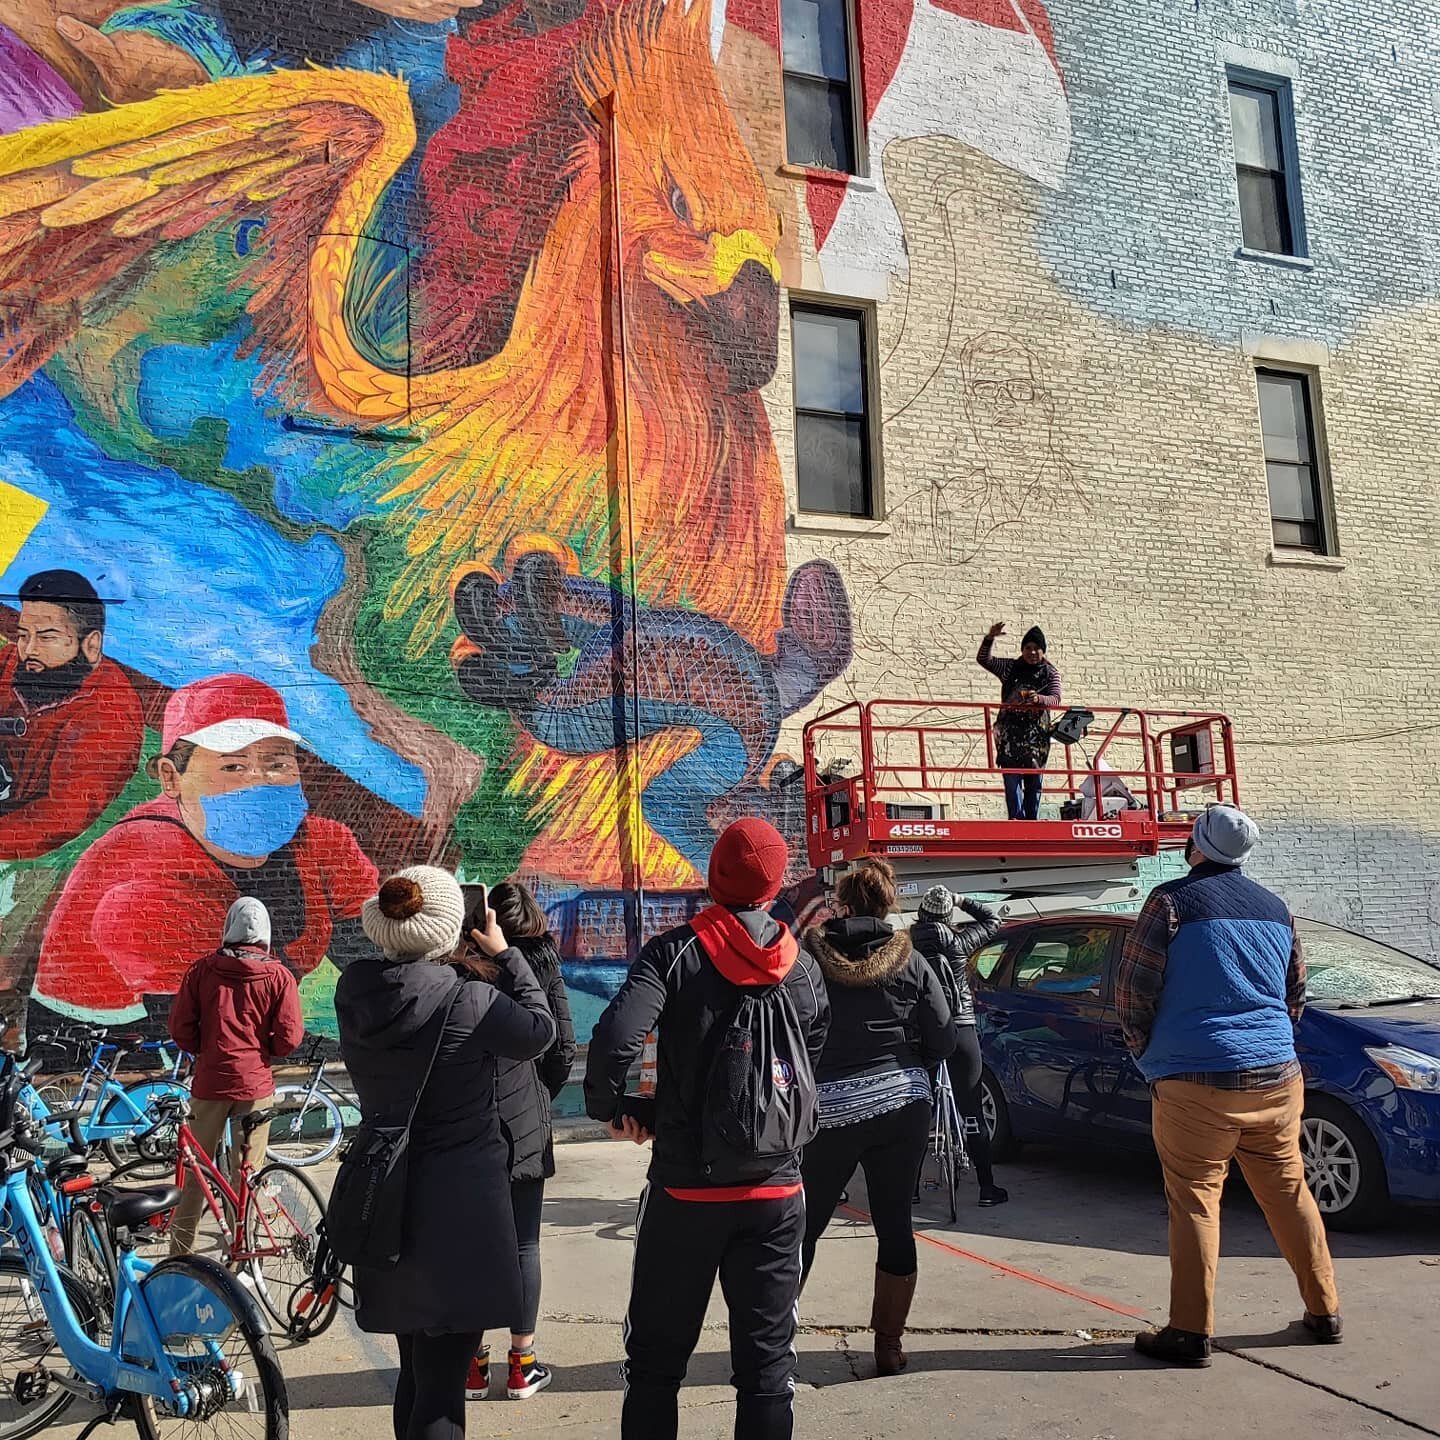 BIKE TOUR THIS SATURDAY AT 12PM!
MEET AT 18TH STREET AND WESTERN AVE. 

Thank you to everyone who joined us on another fun bike tour of the murals. We had a wonderful time and had a chance to chat with @pabloserranoart about his mural in progress.

S